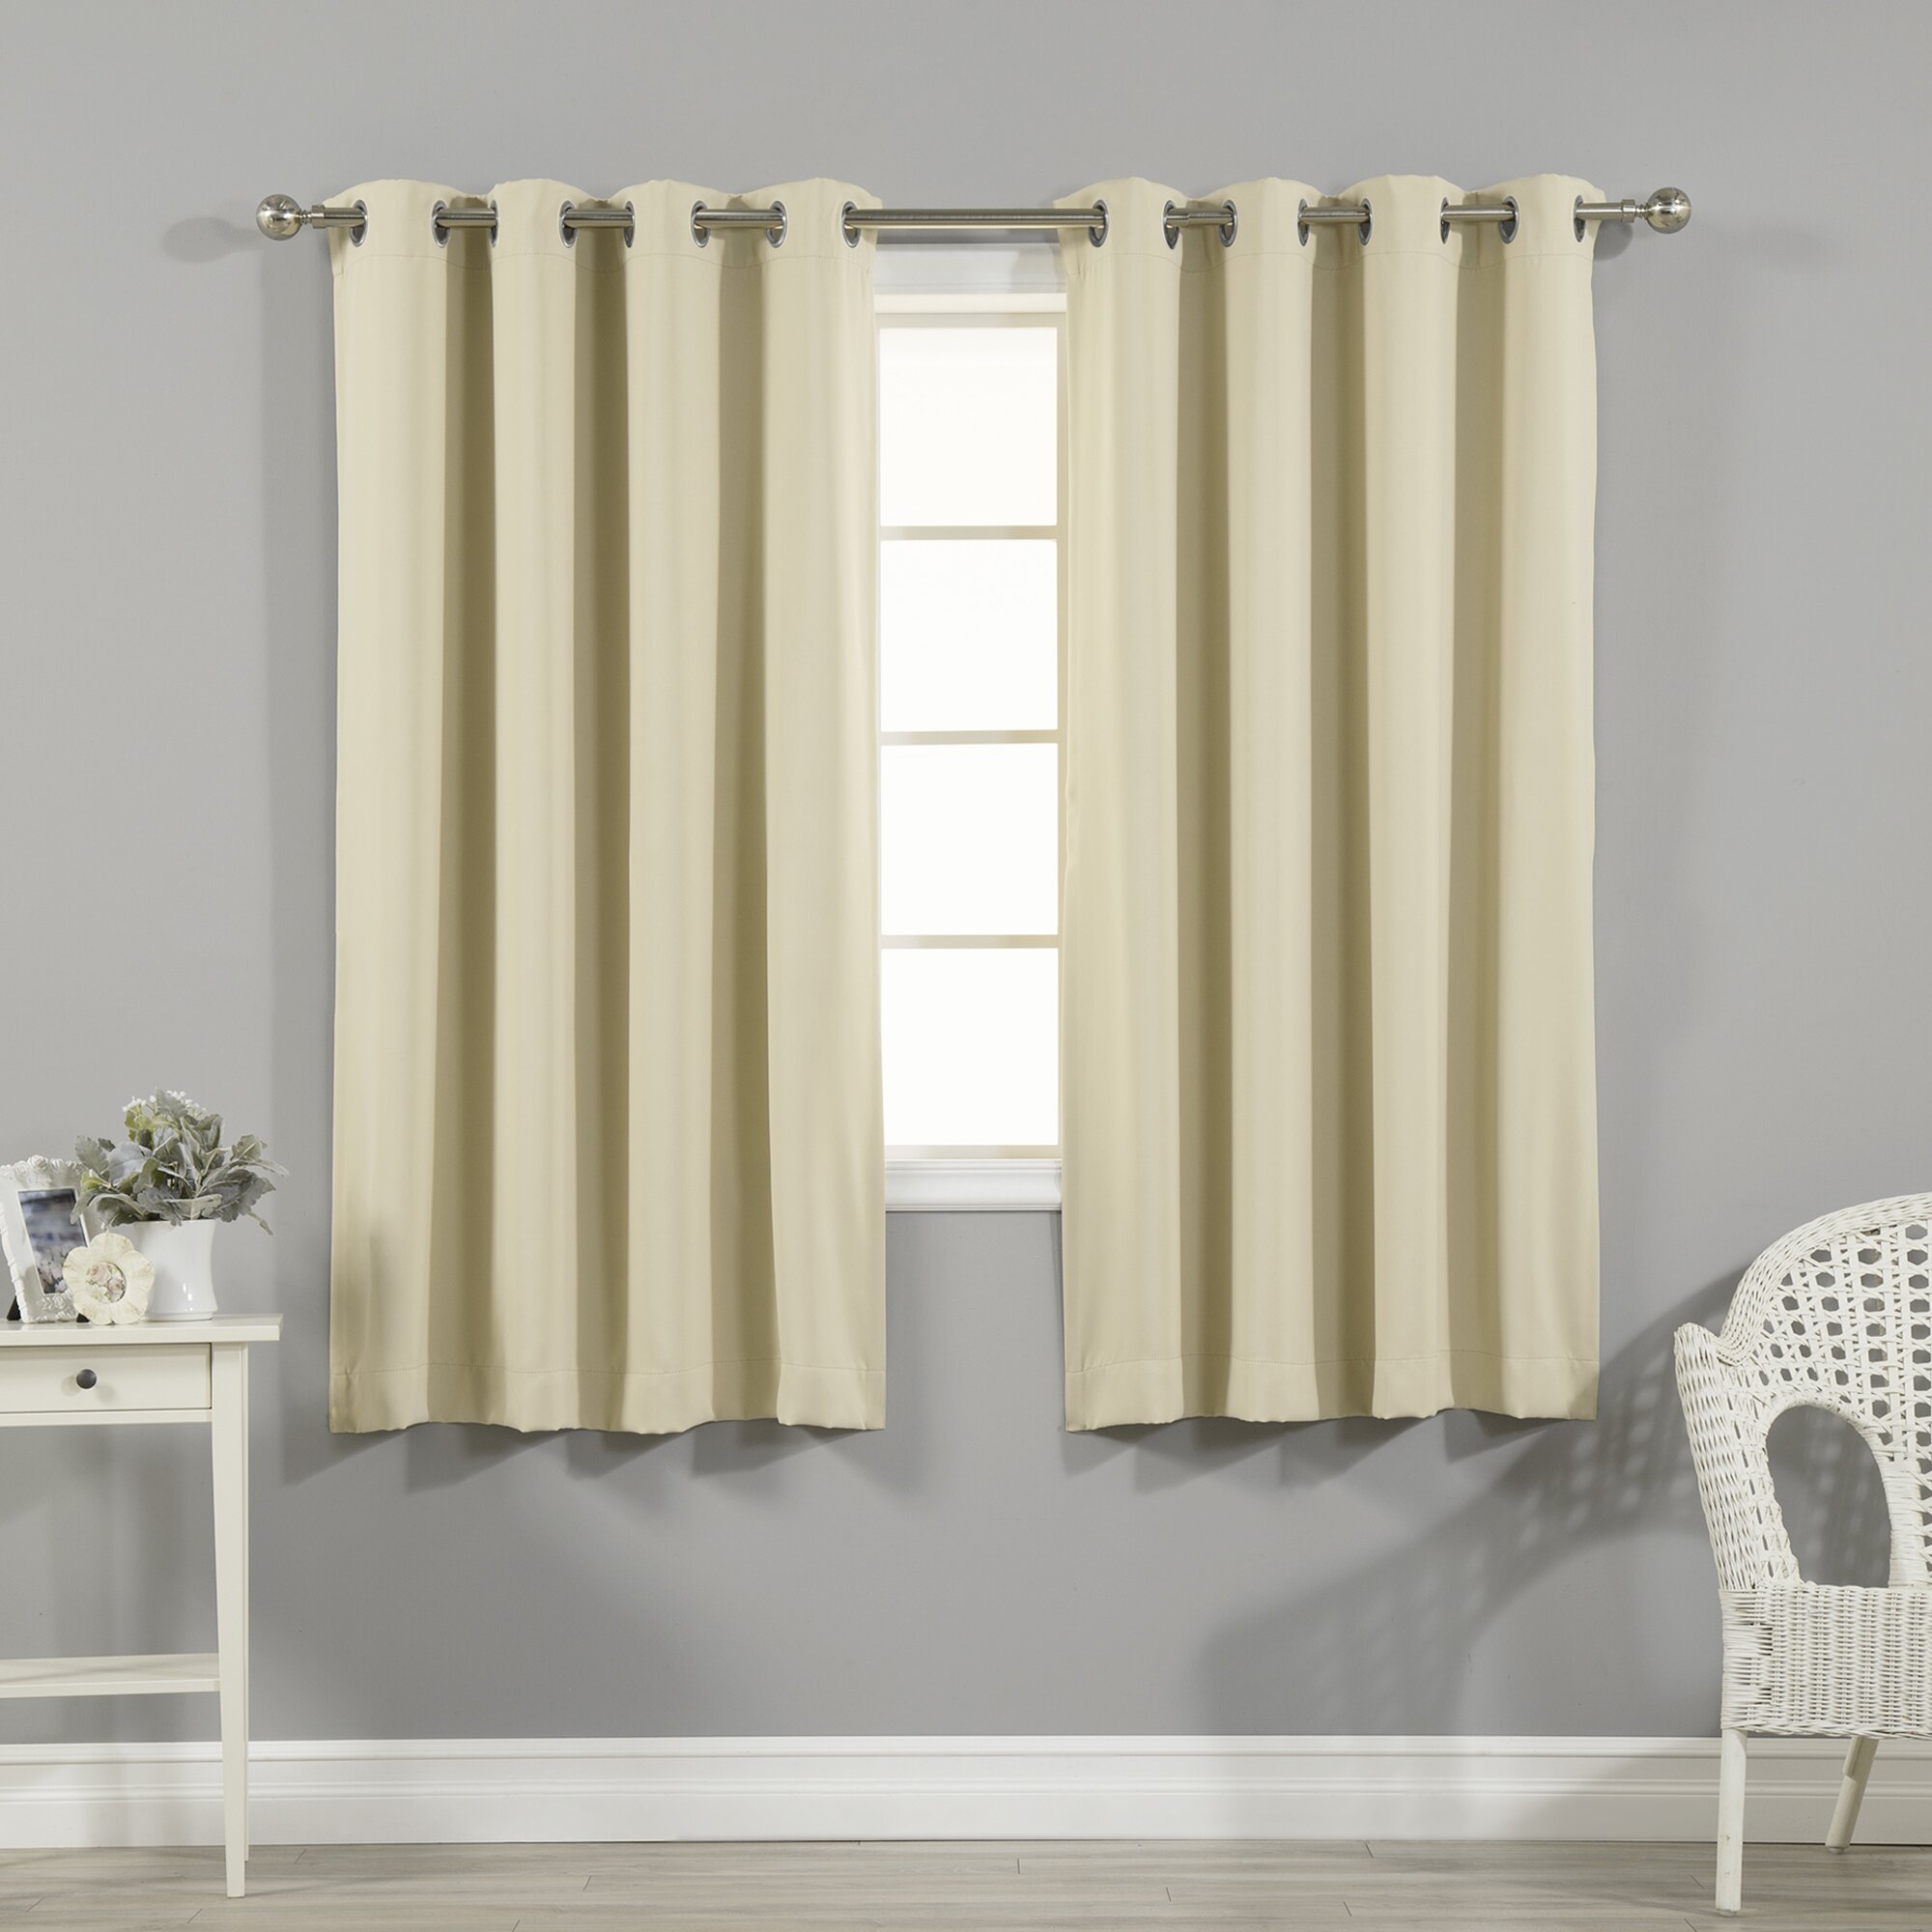 Best Home Fashion, Inc. Grommet Top Insulated Blackout Thermal Curtain